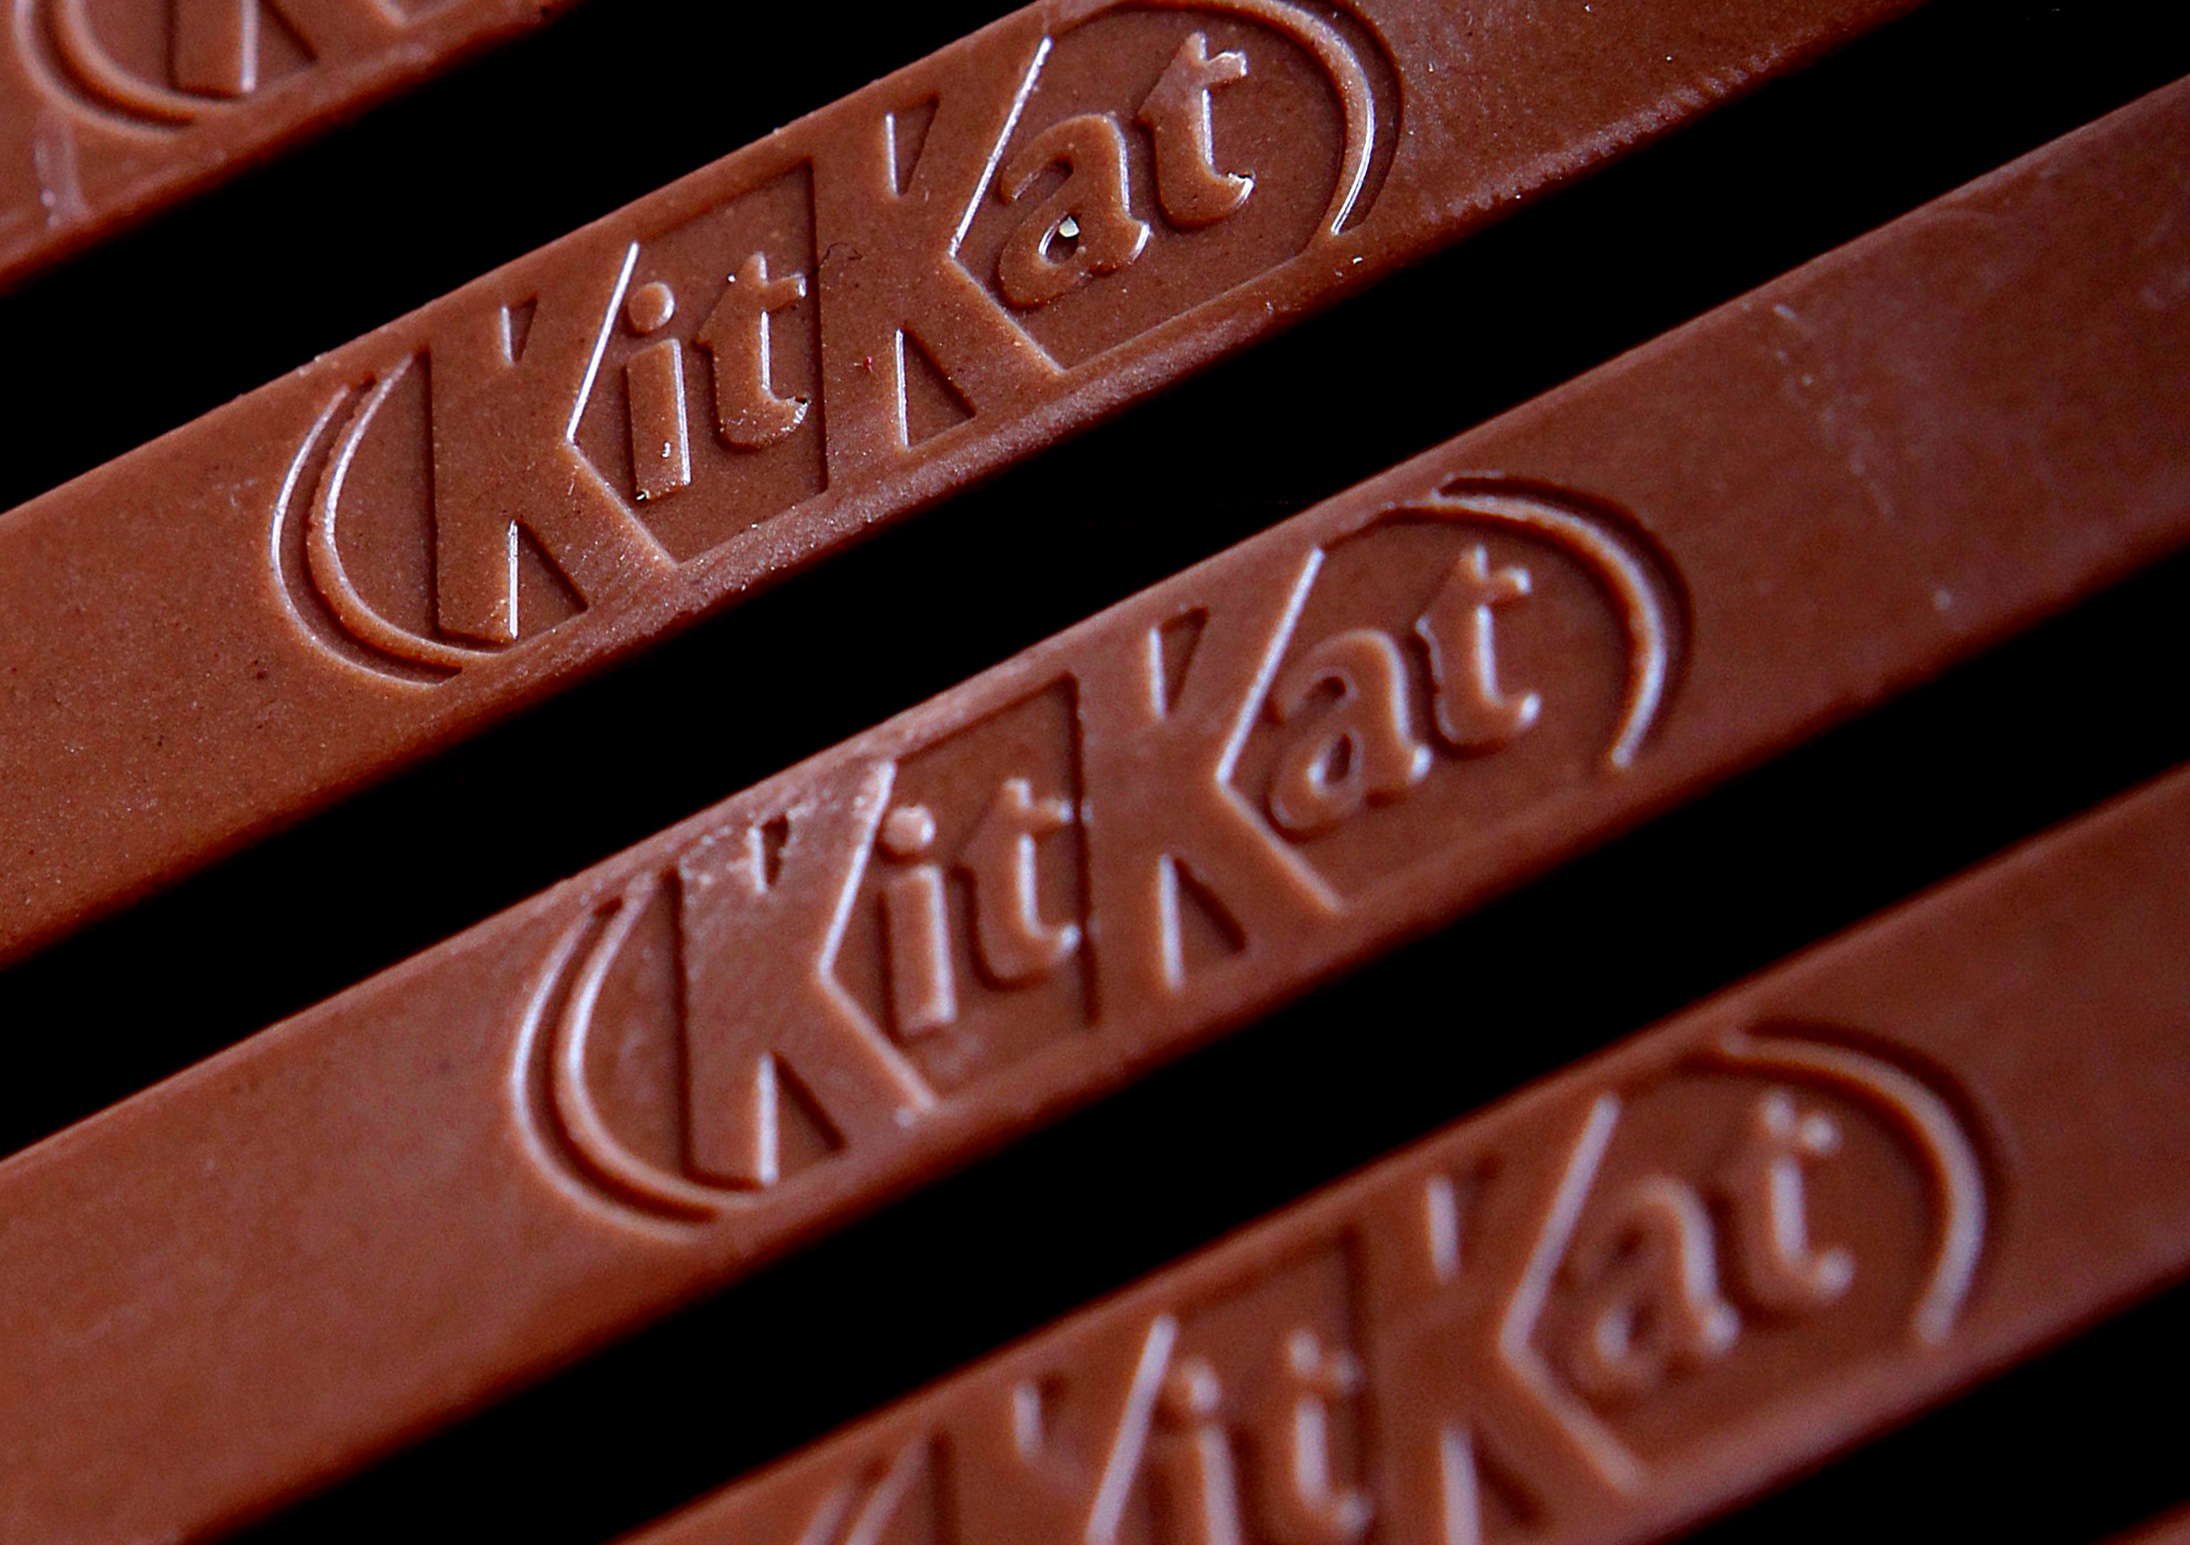 KitKat Chocolate by Nestle to Be Available Year For Run - Bloomberg